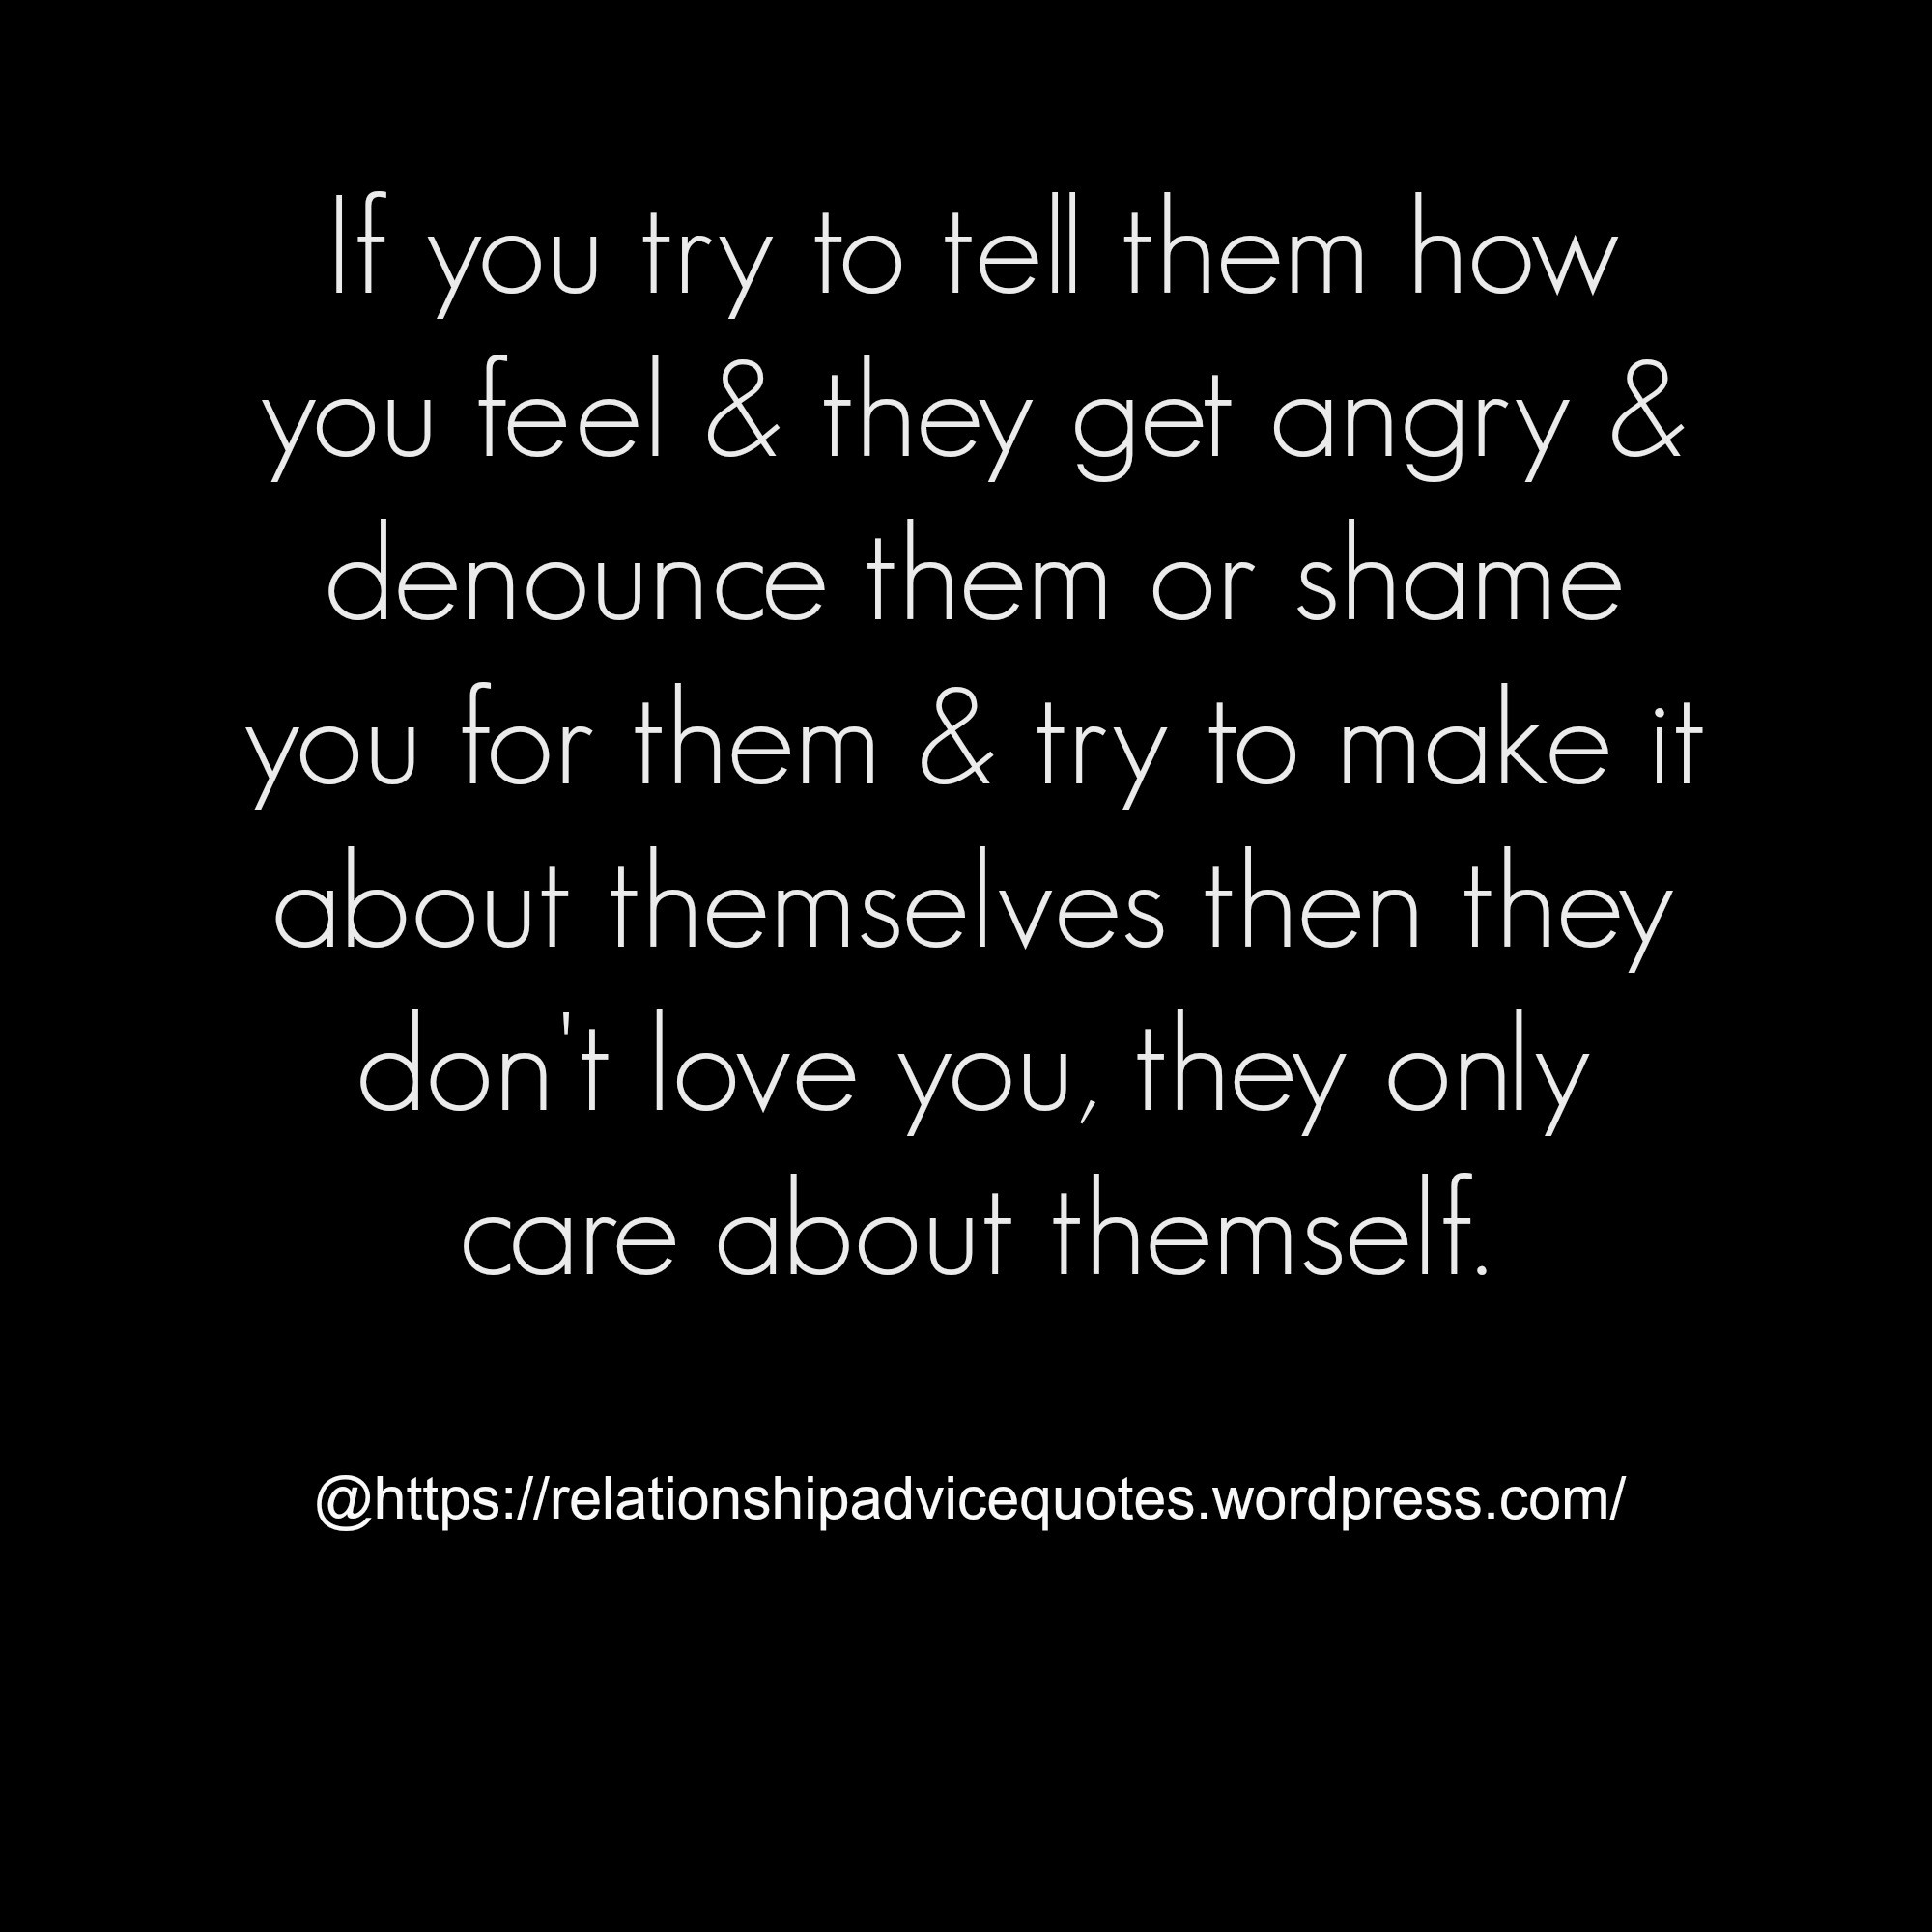 Relationship Advice Quotes
 Emotionally Abusive Relationship Advice & Quotes – This is